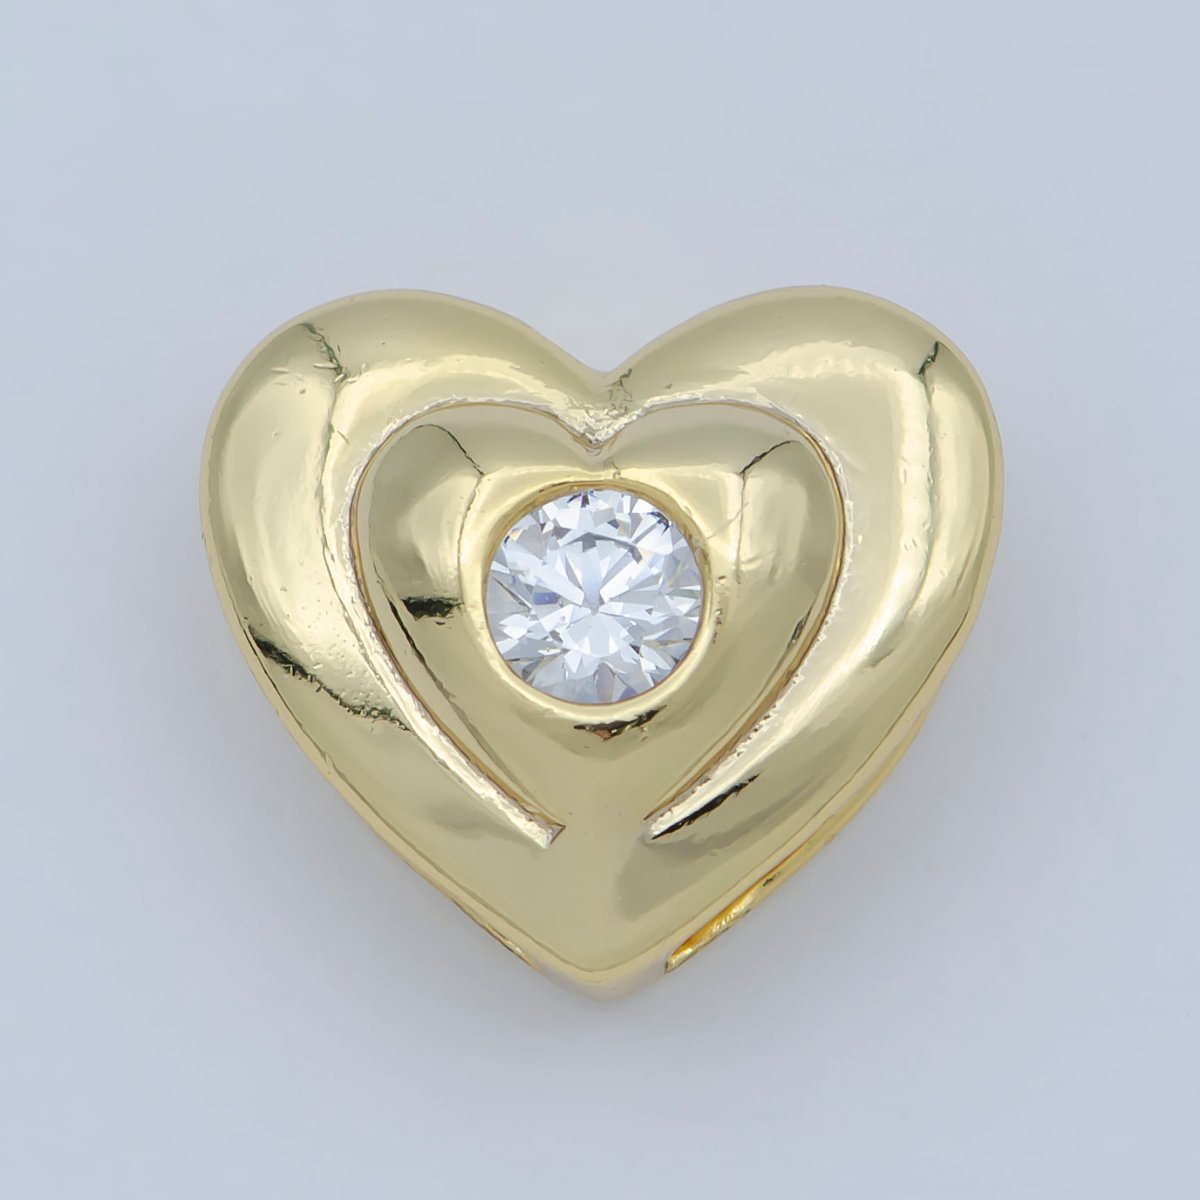 Mini Heart Beads - 10mm Puffy Heart Beautiful 3D Love Jewelry Gold Filled Bead spacer for Bracelet Necklace Supply | B-545 - DLUXCA